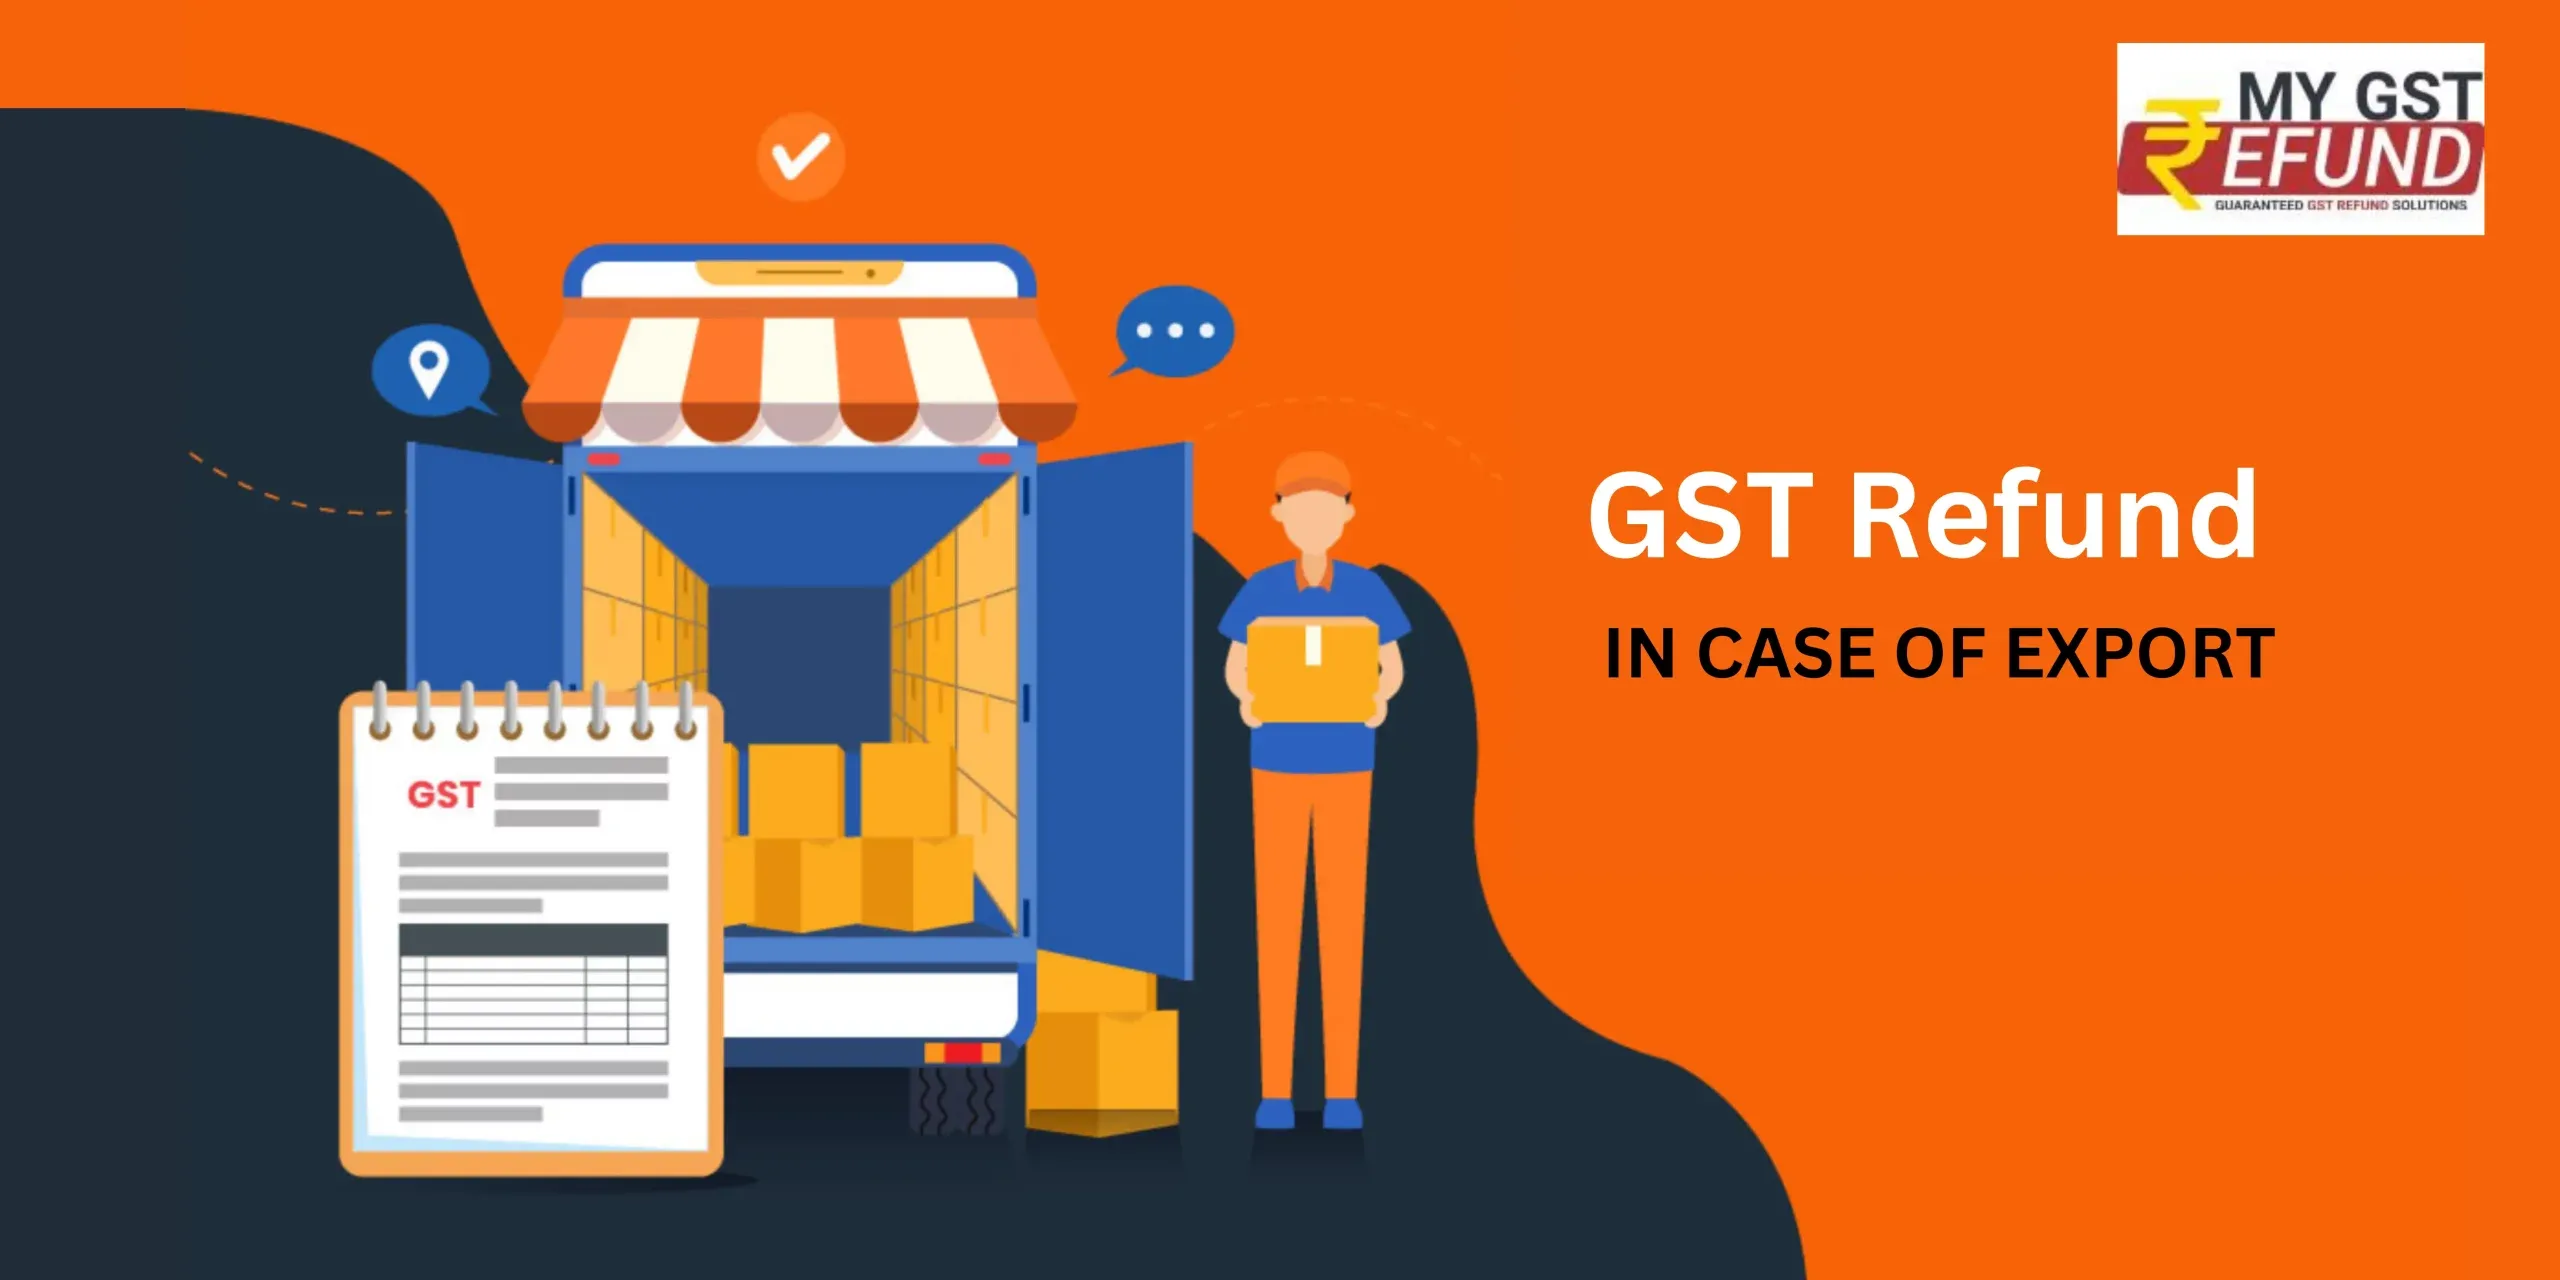 A Comprehensive Guide to GST Refund for Exports: Process, Eligibility, and Requirements